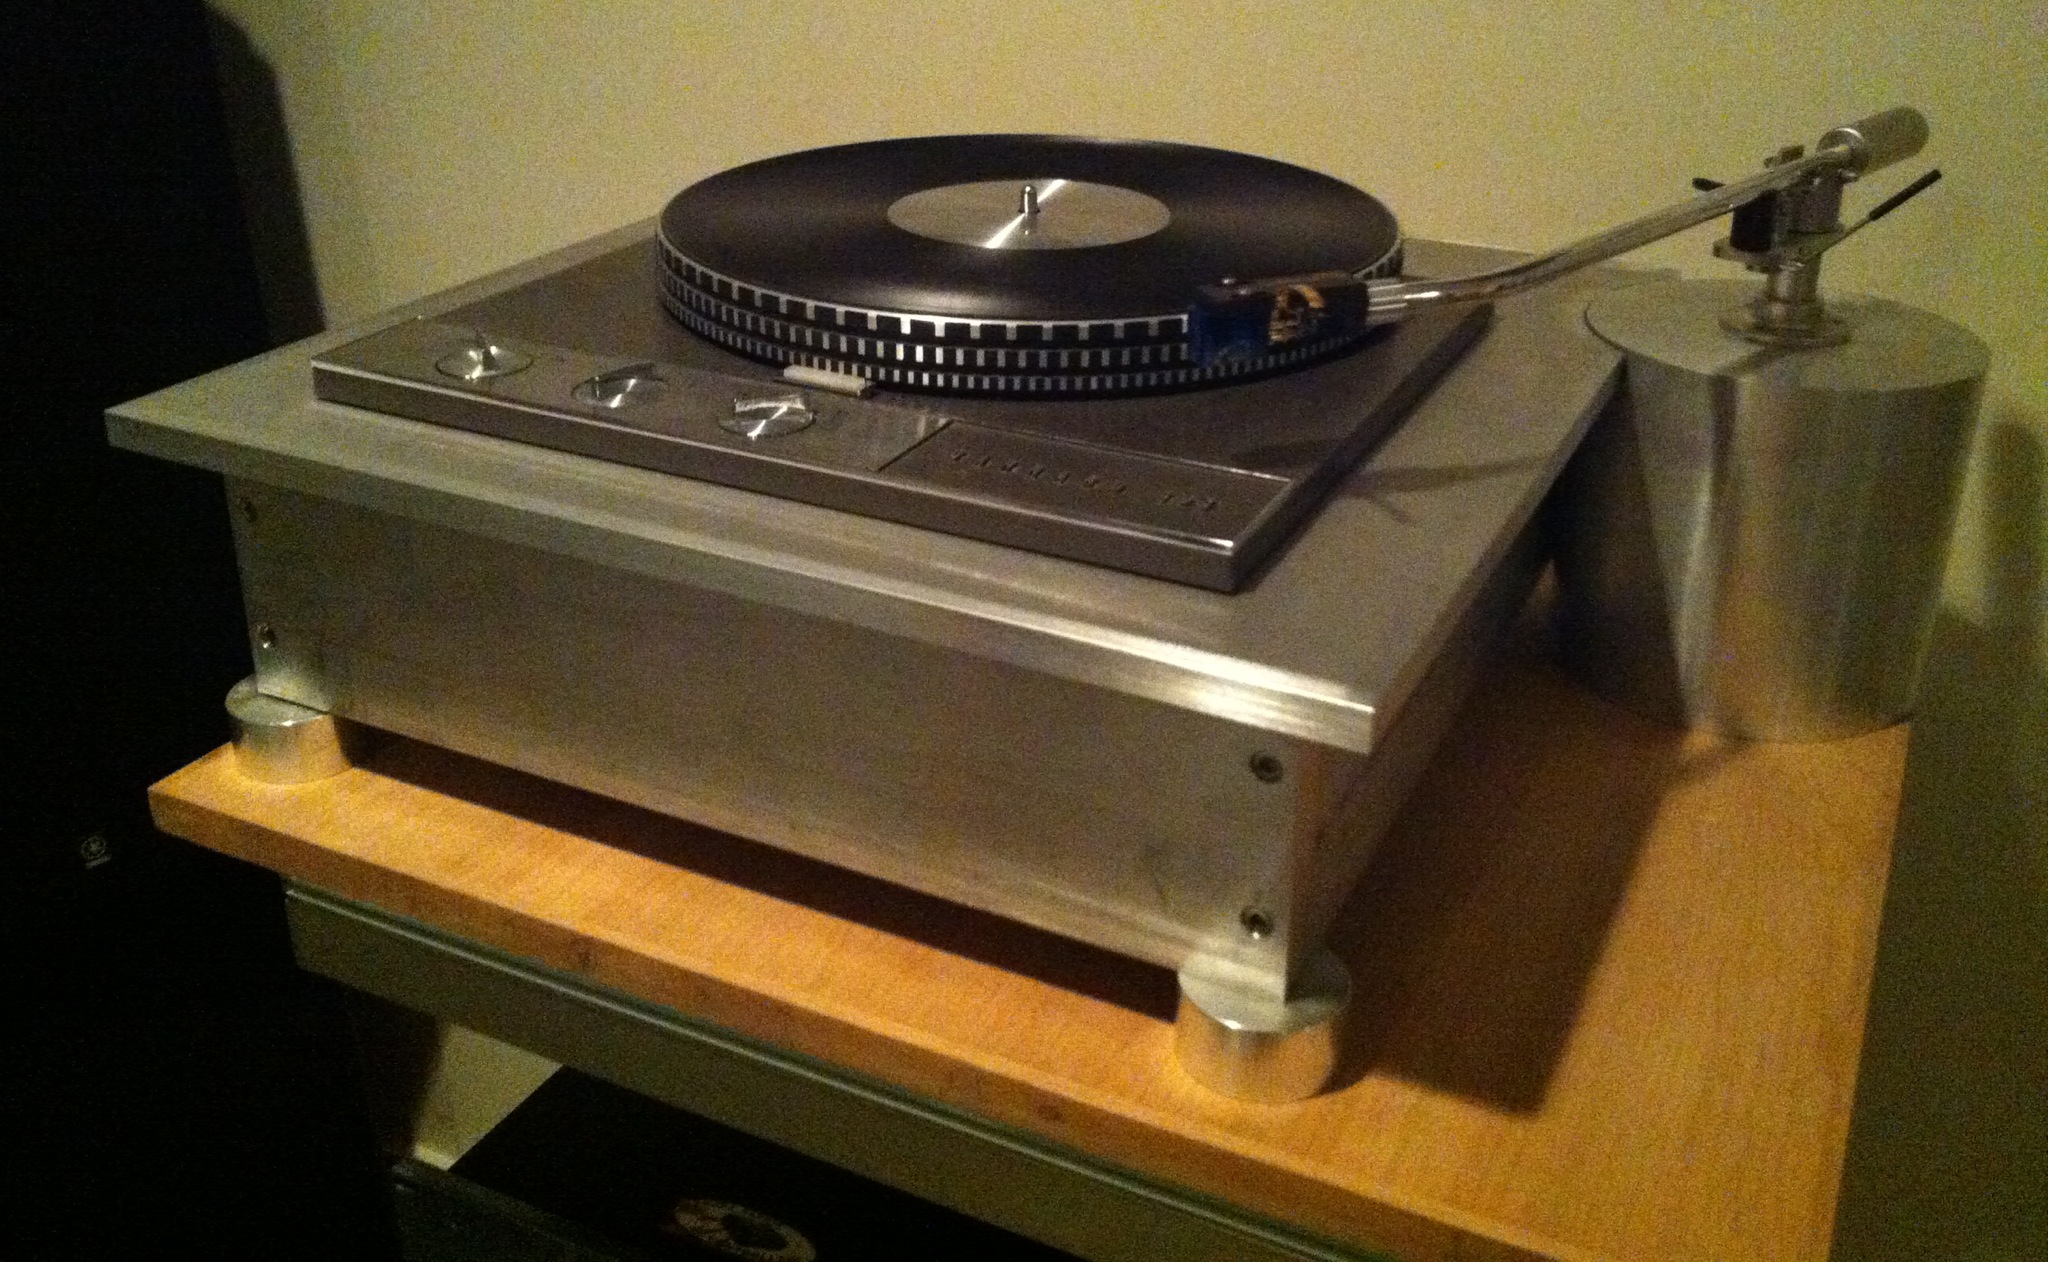 Garrard 401 Turntable with exquisite double plinth and footers